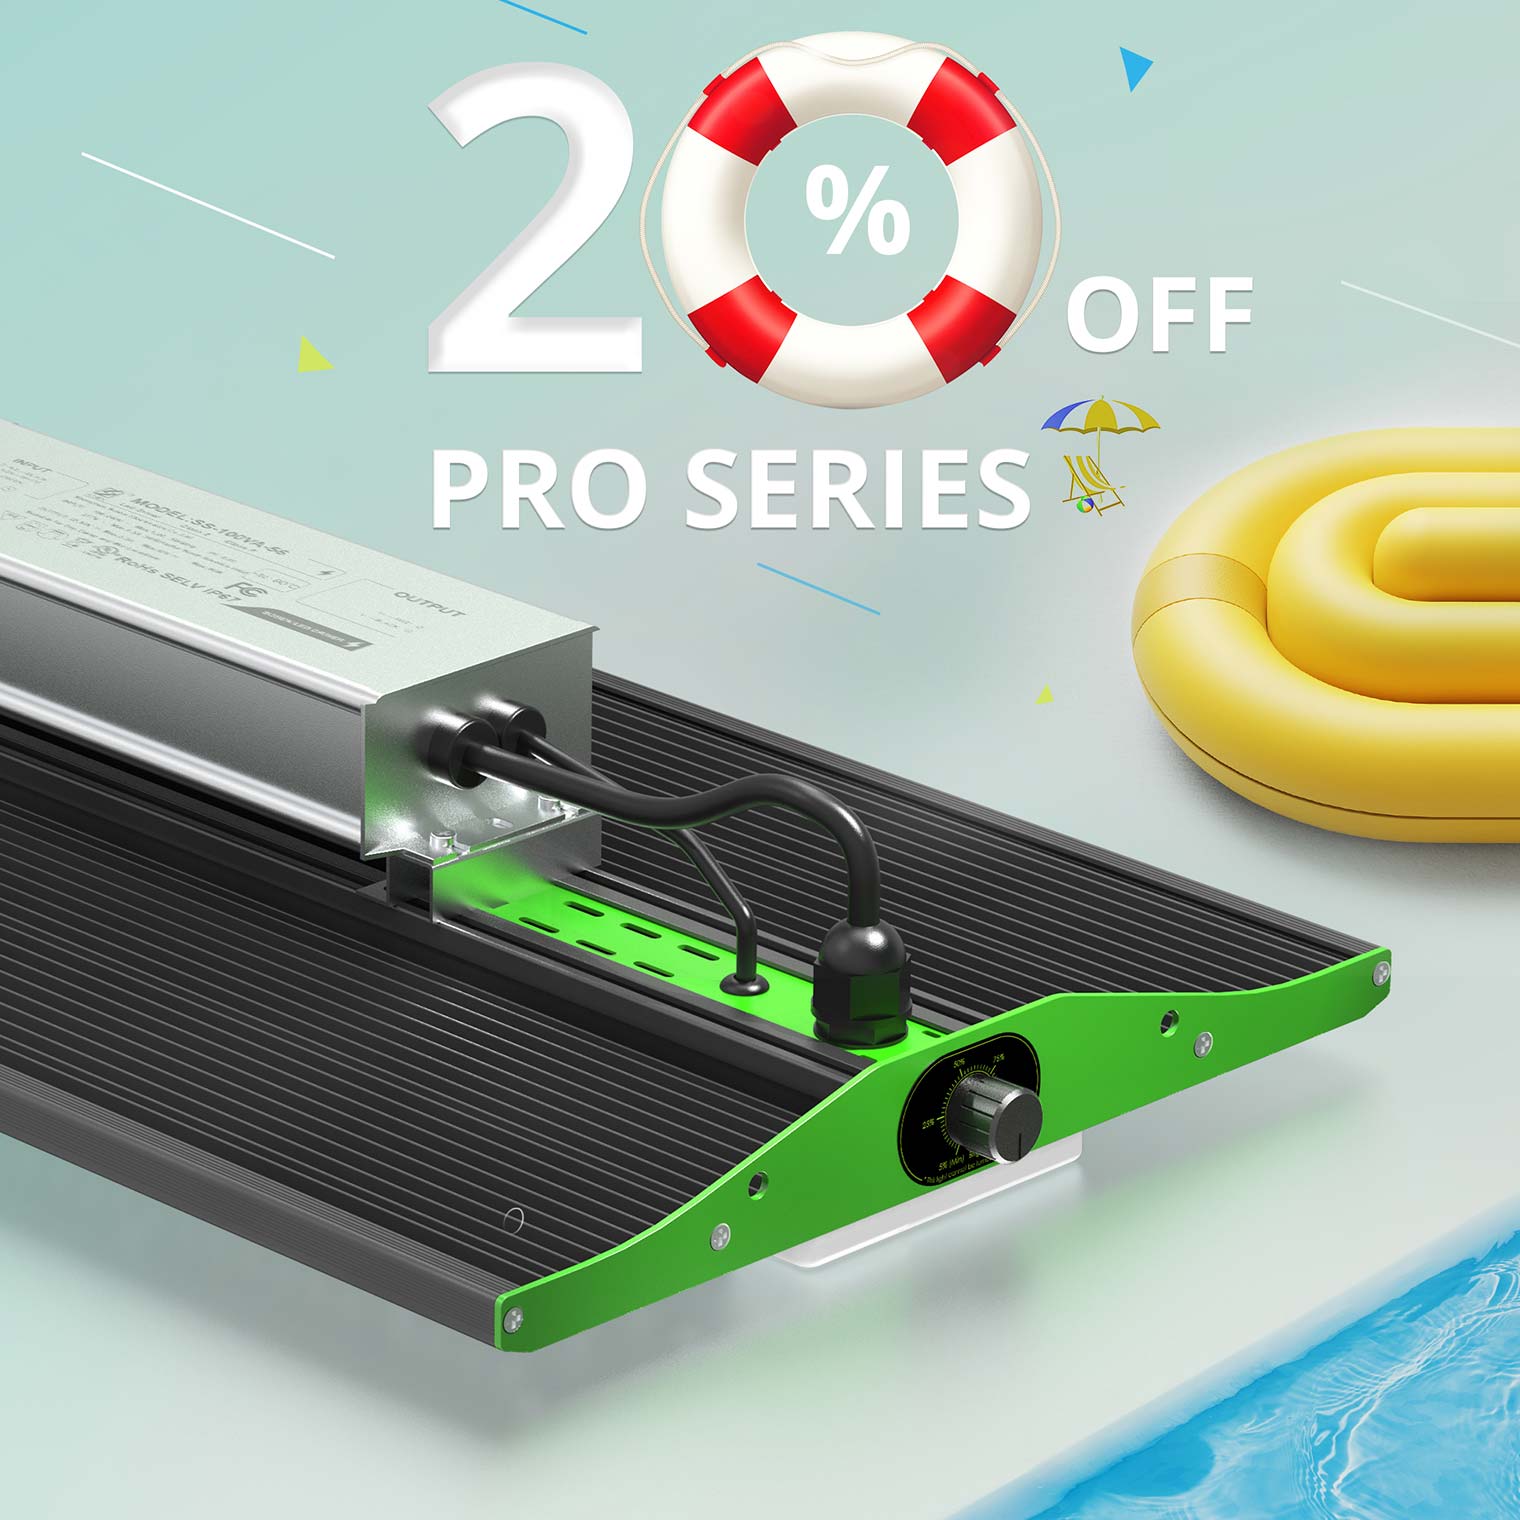 Summer Sale - Special Offer for Pro Series Starts